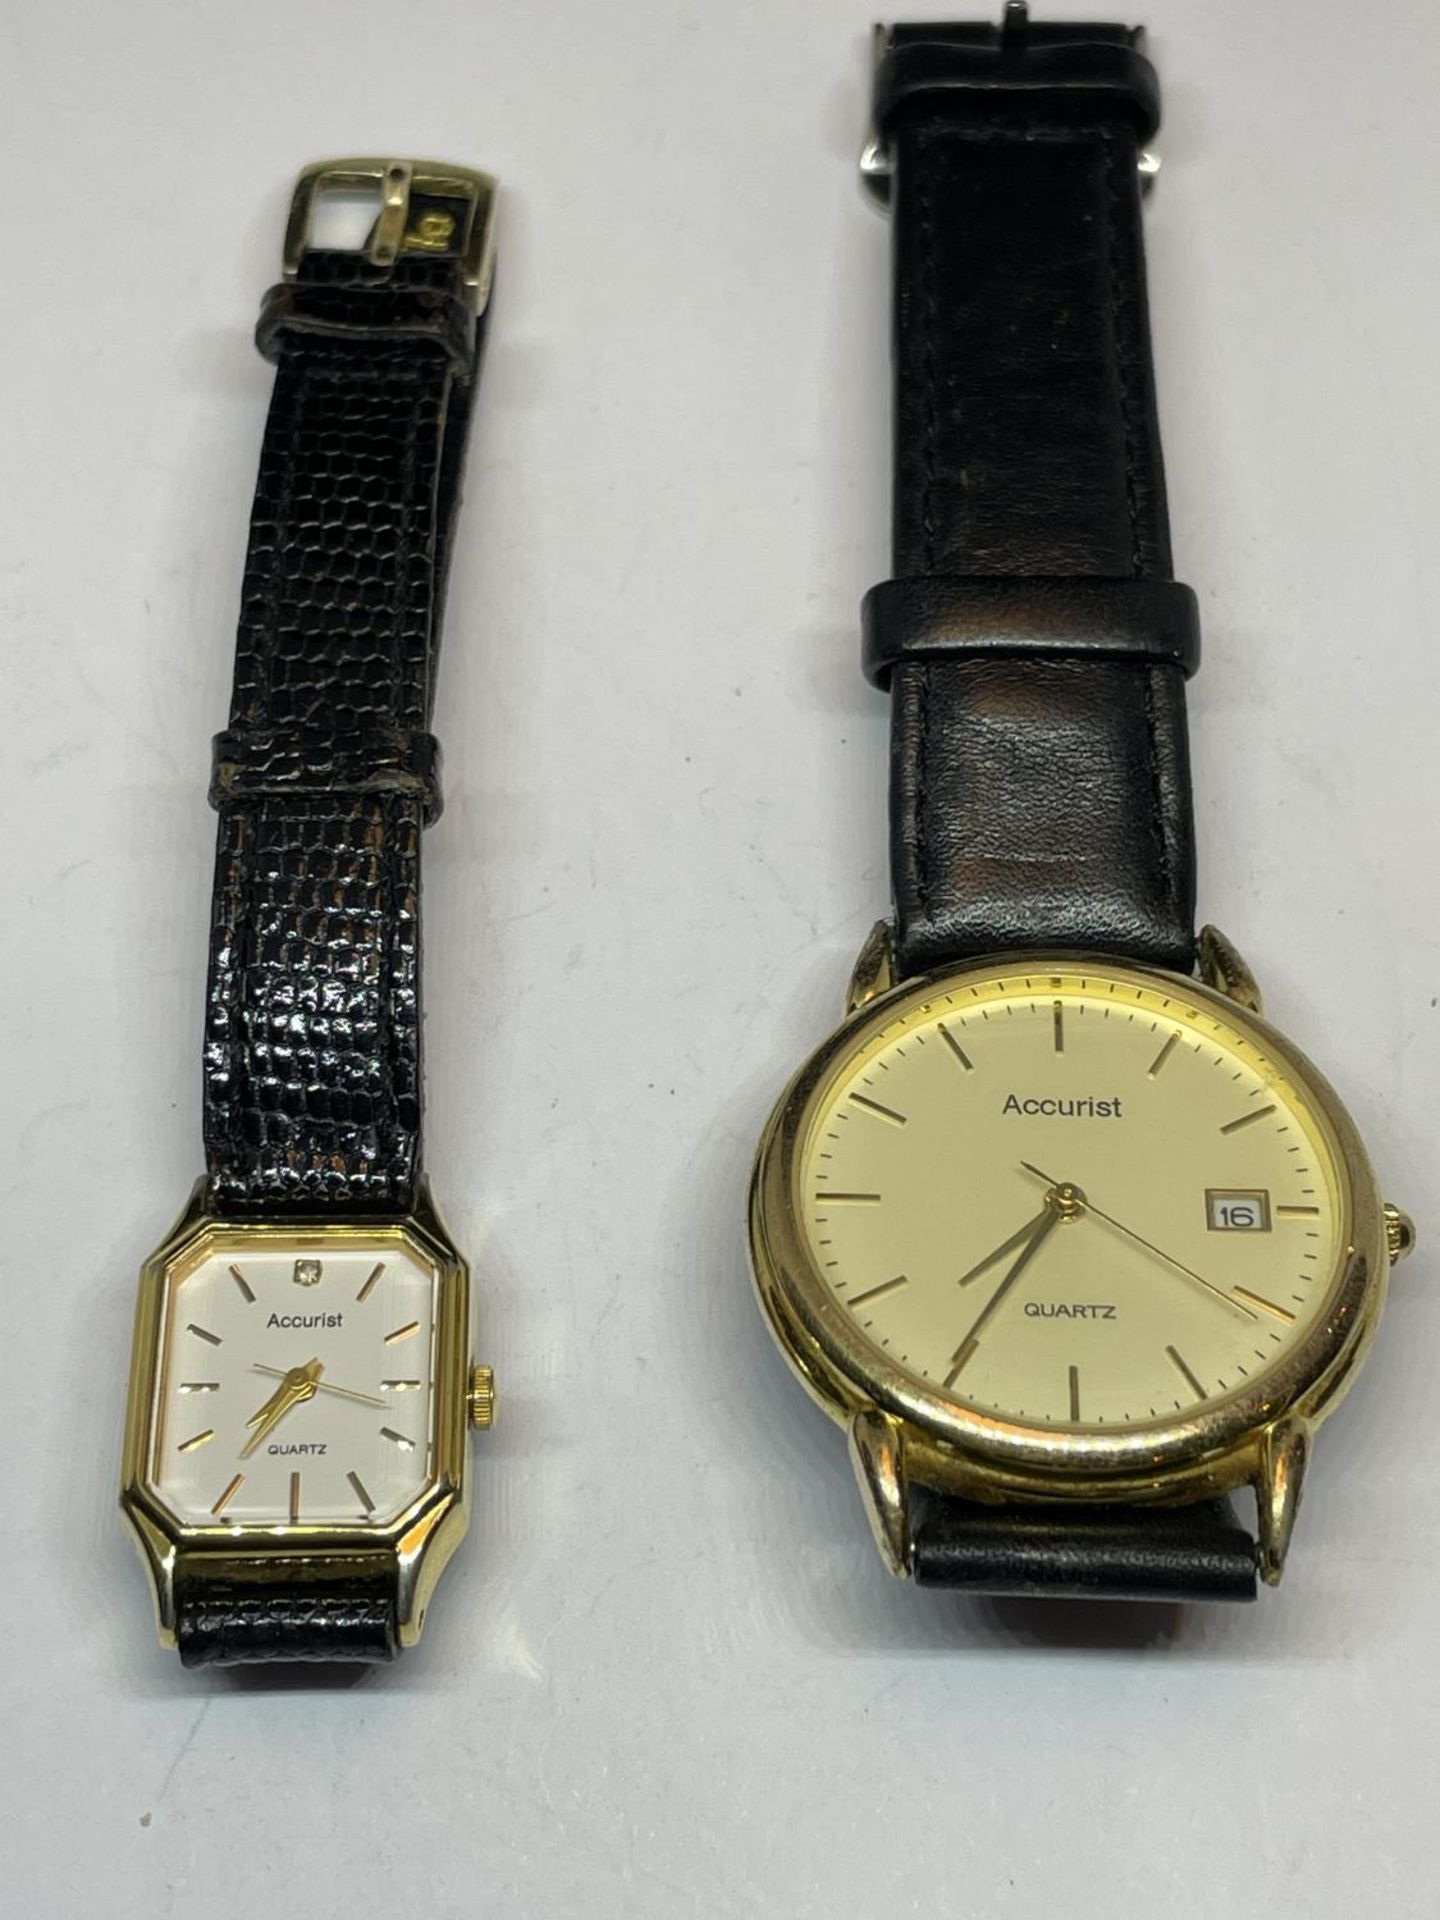 TWO ACCURIST WRIST WATCHES SEEN WORKING BUT NO WARRANTY